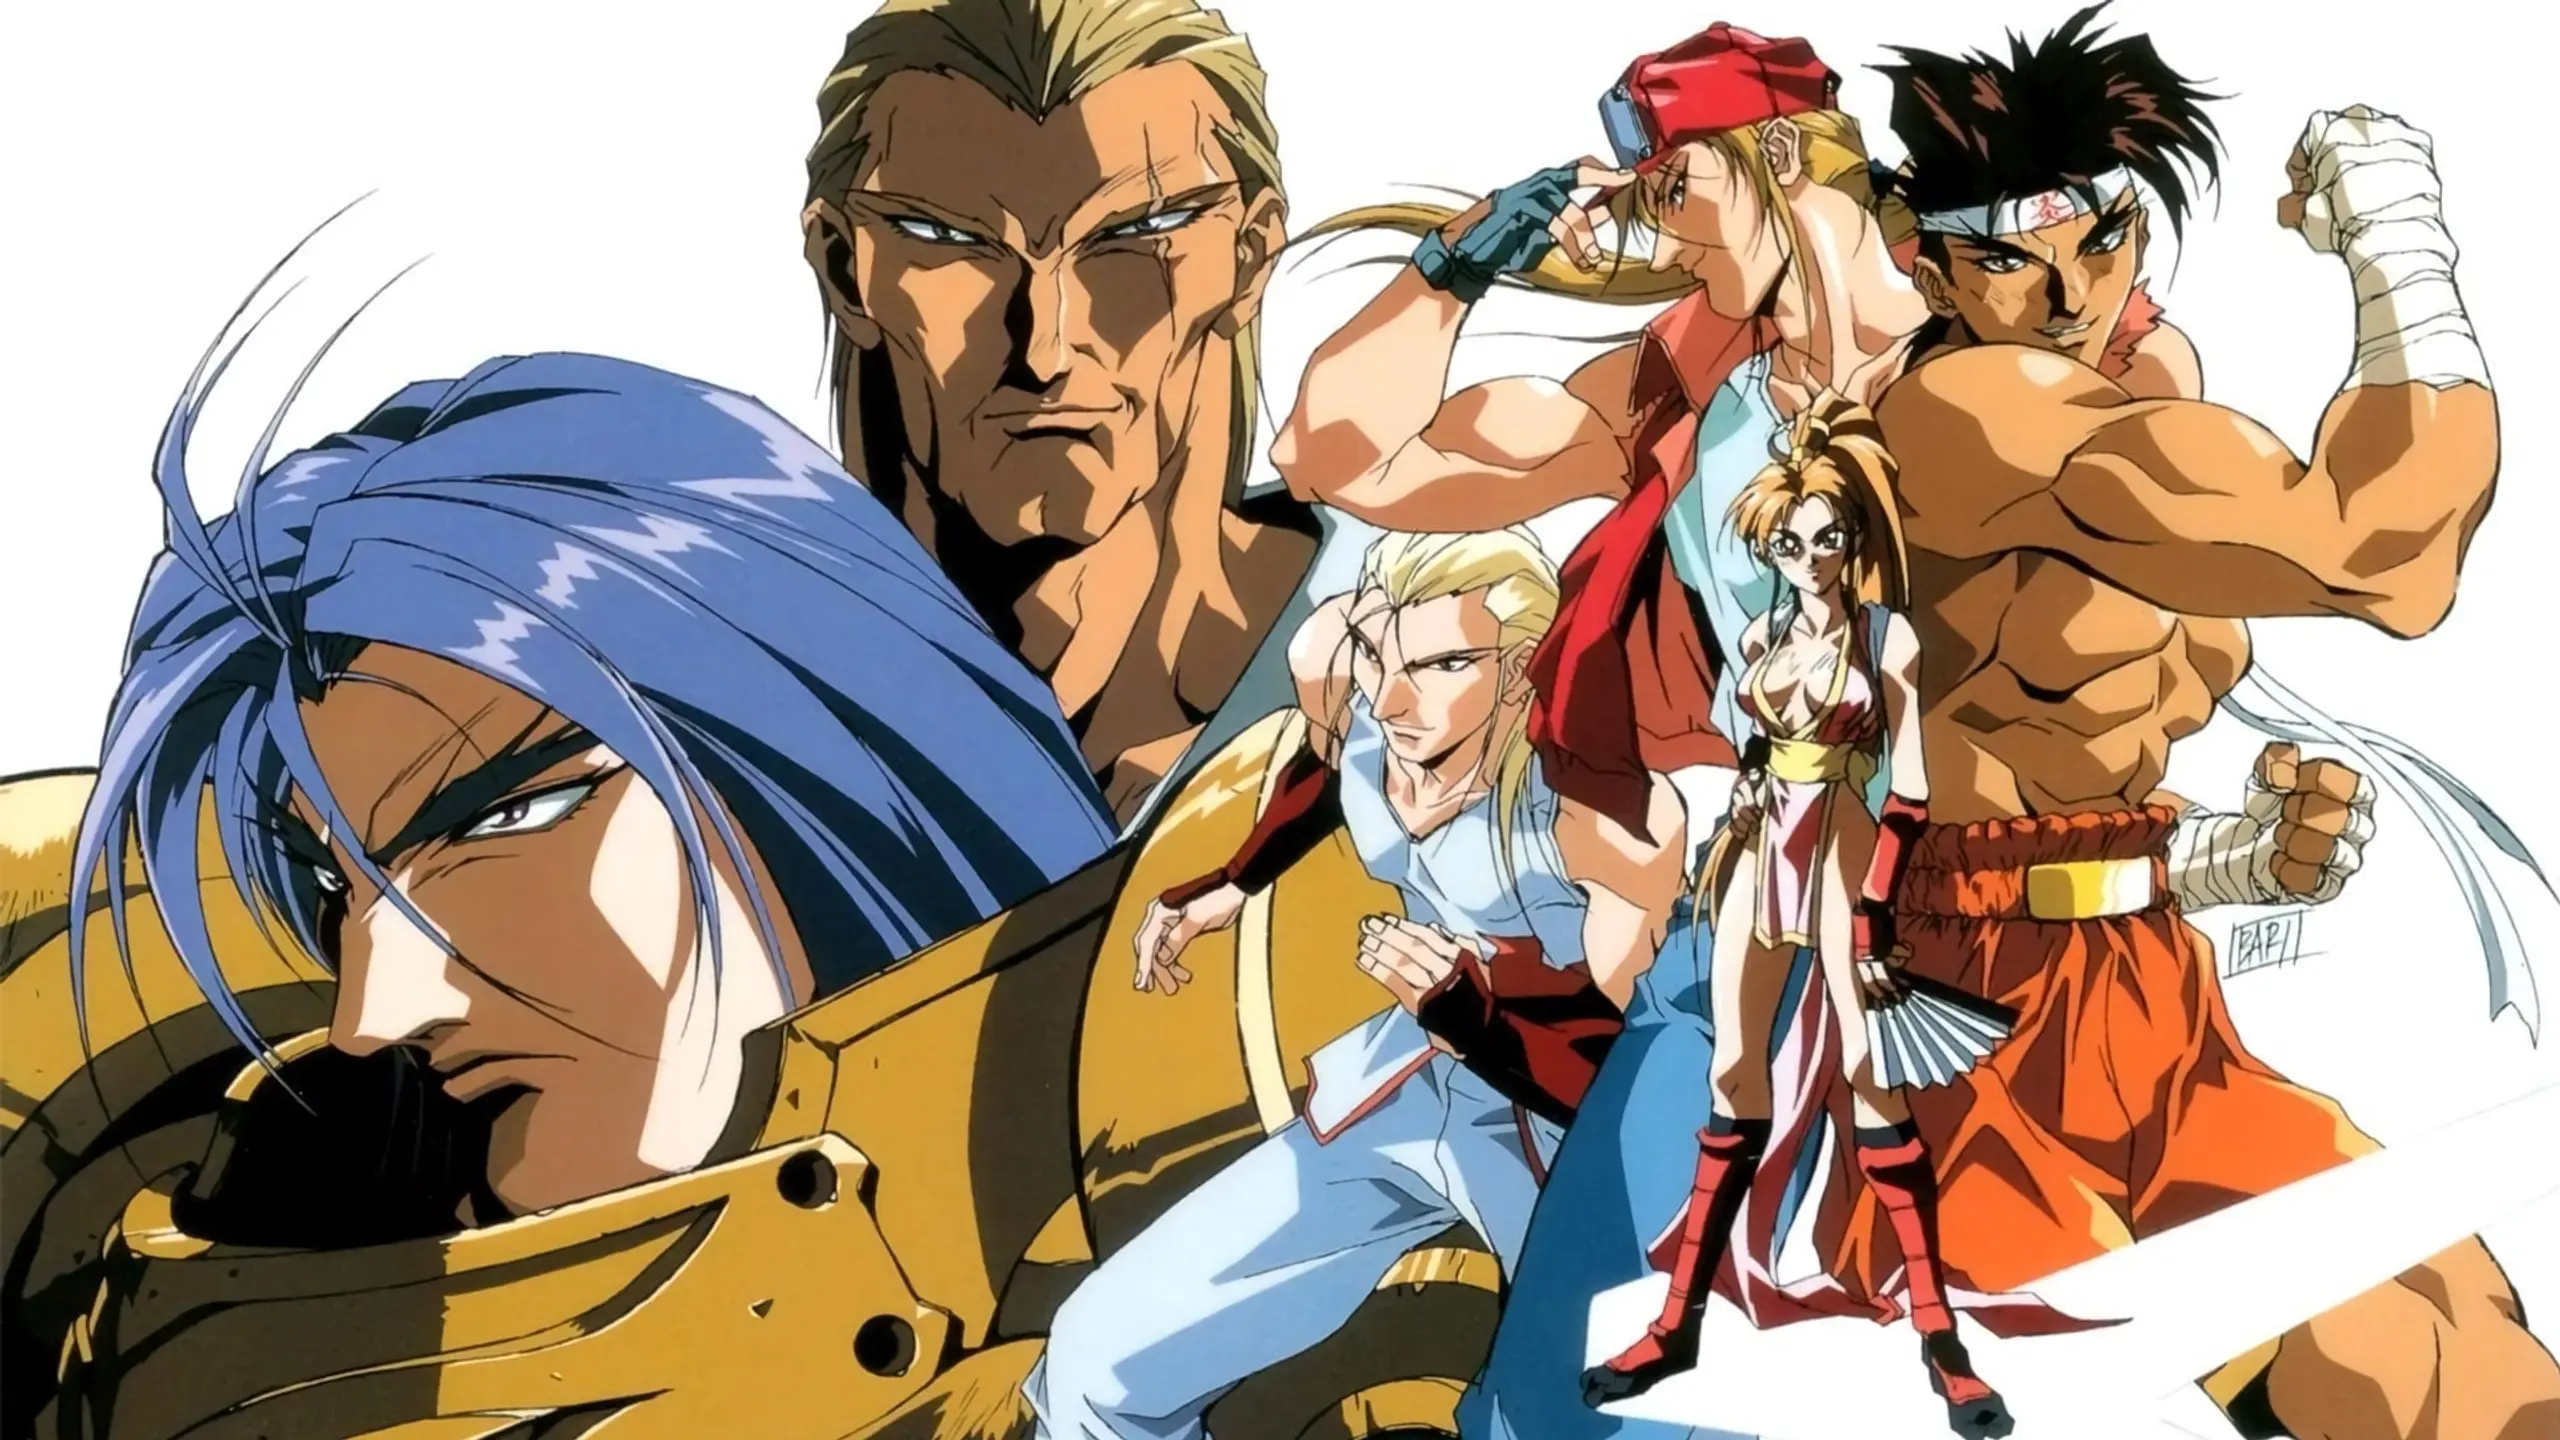 Fatal Fury - The Motion Picture